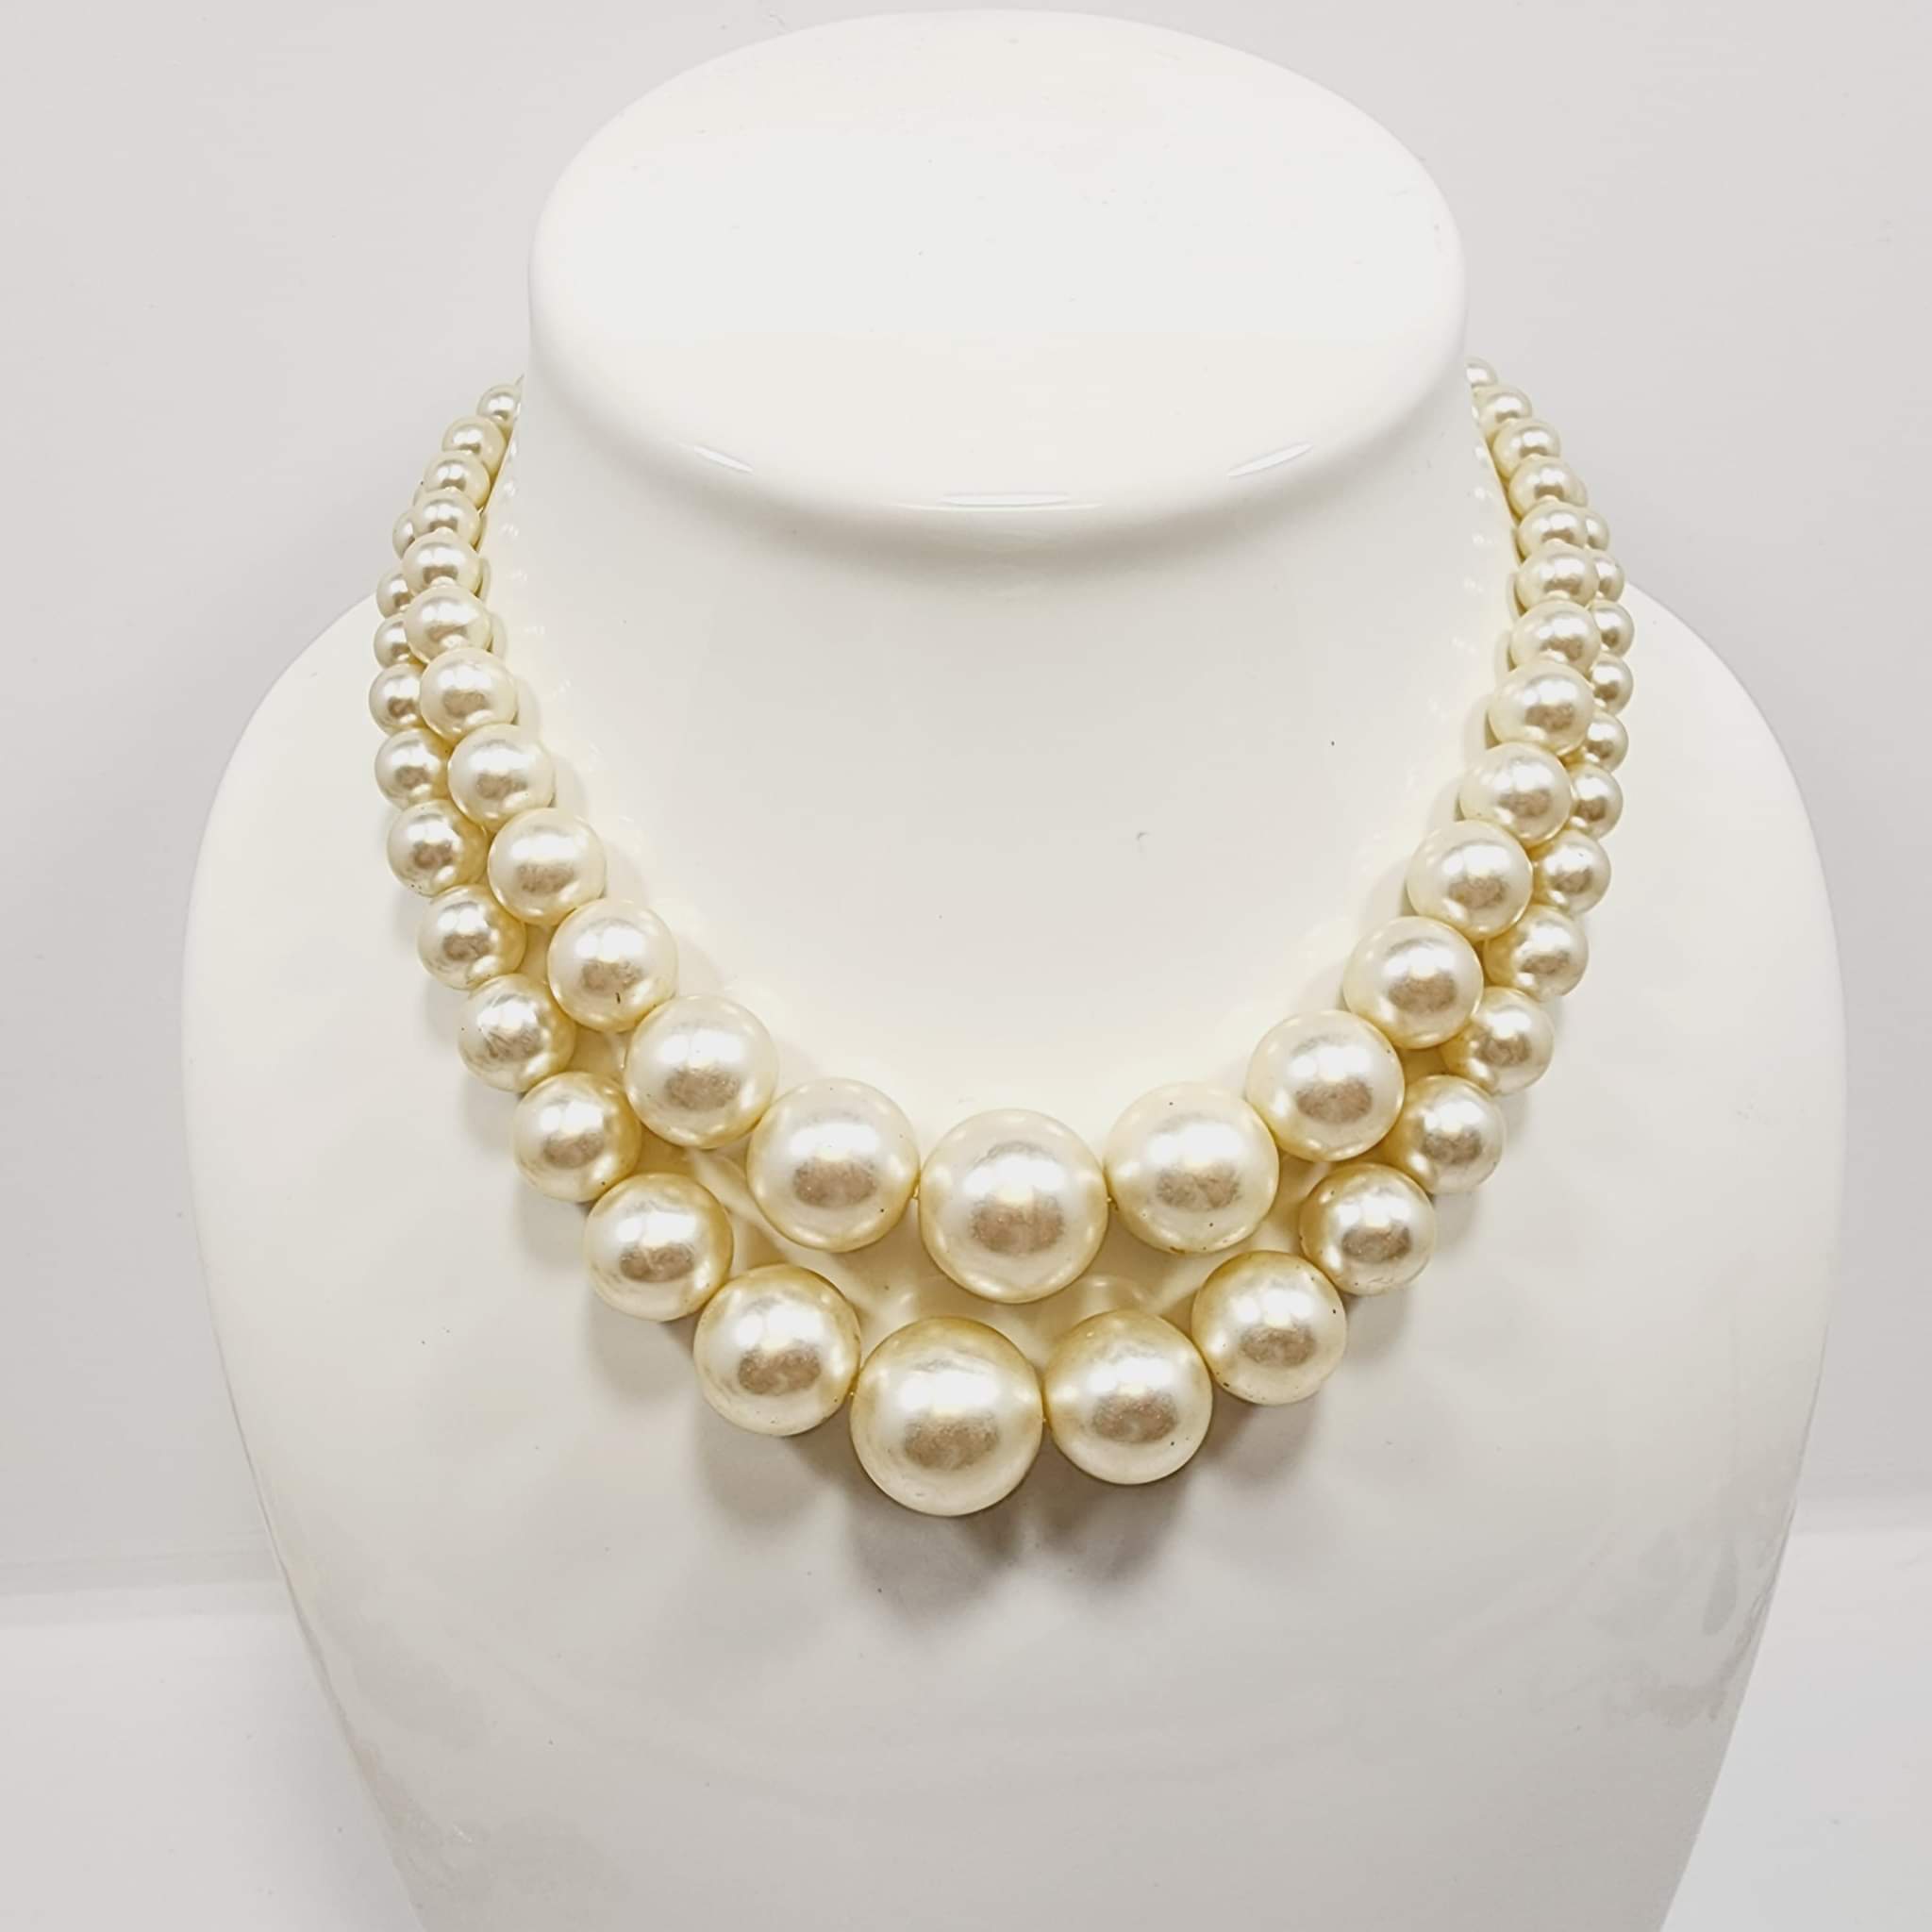 Sold at Auction: Possibly Tiffany & Co 18K Rabbit & Pearl Necklace